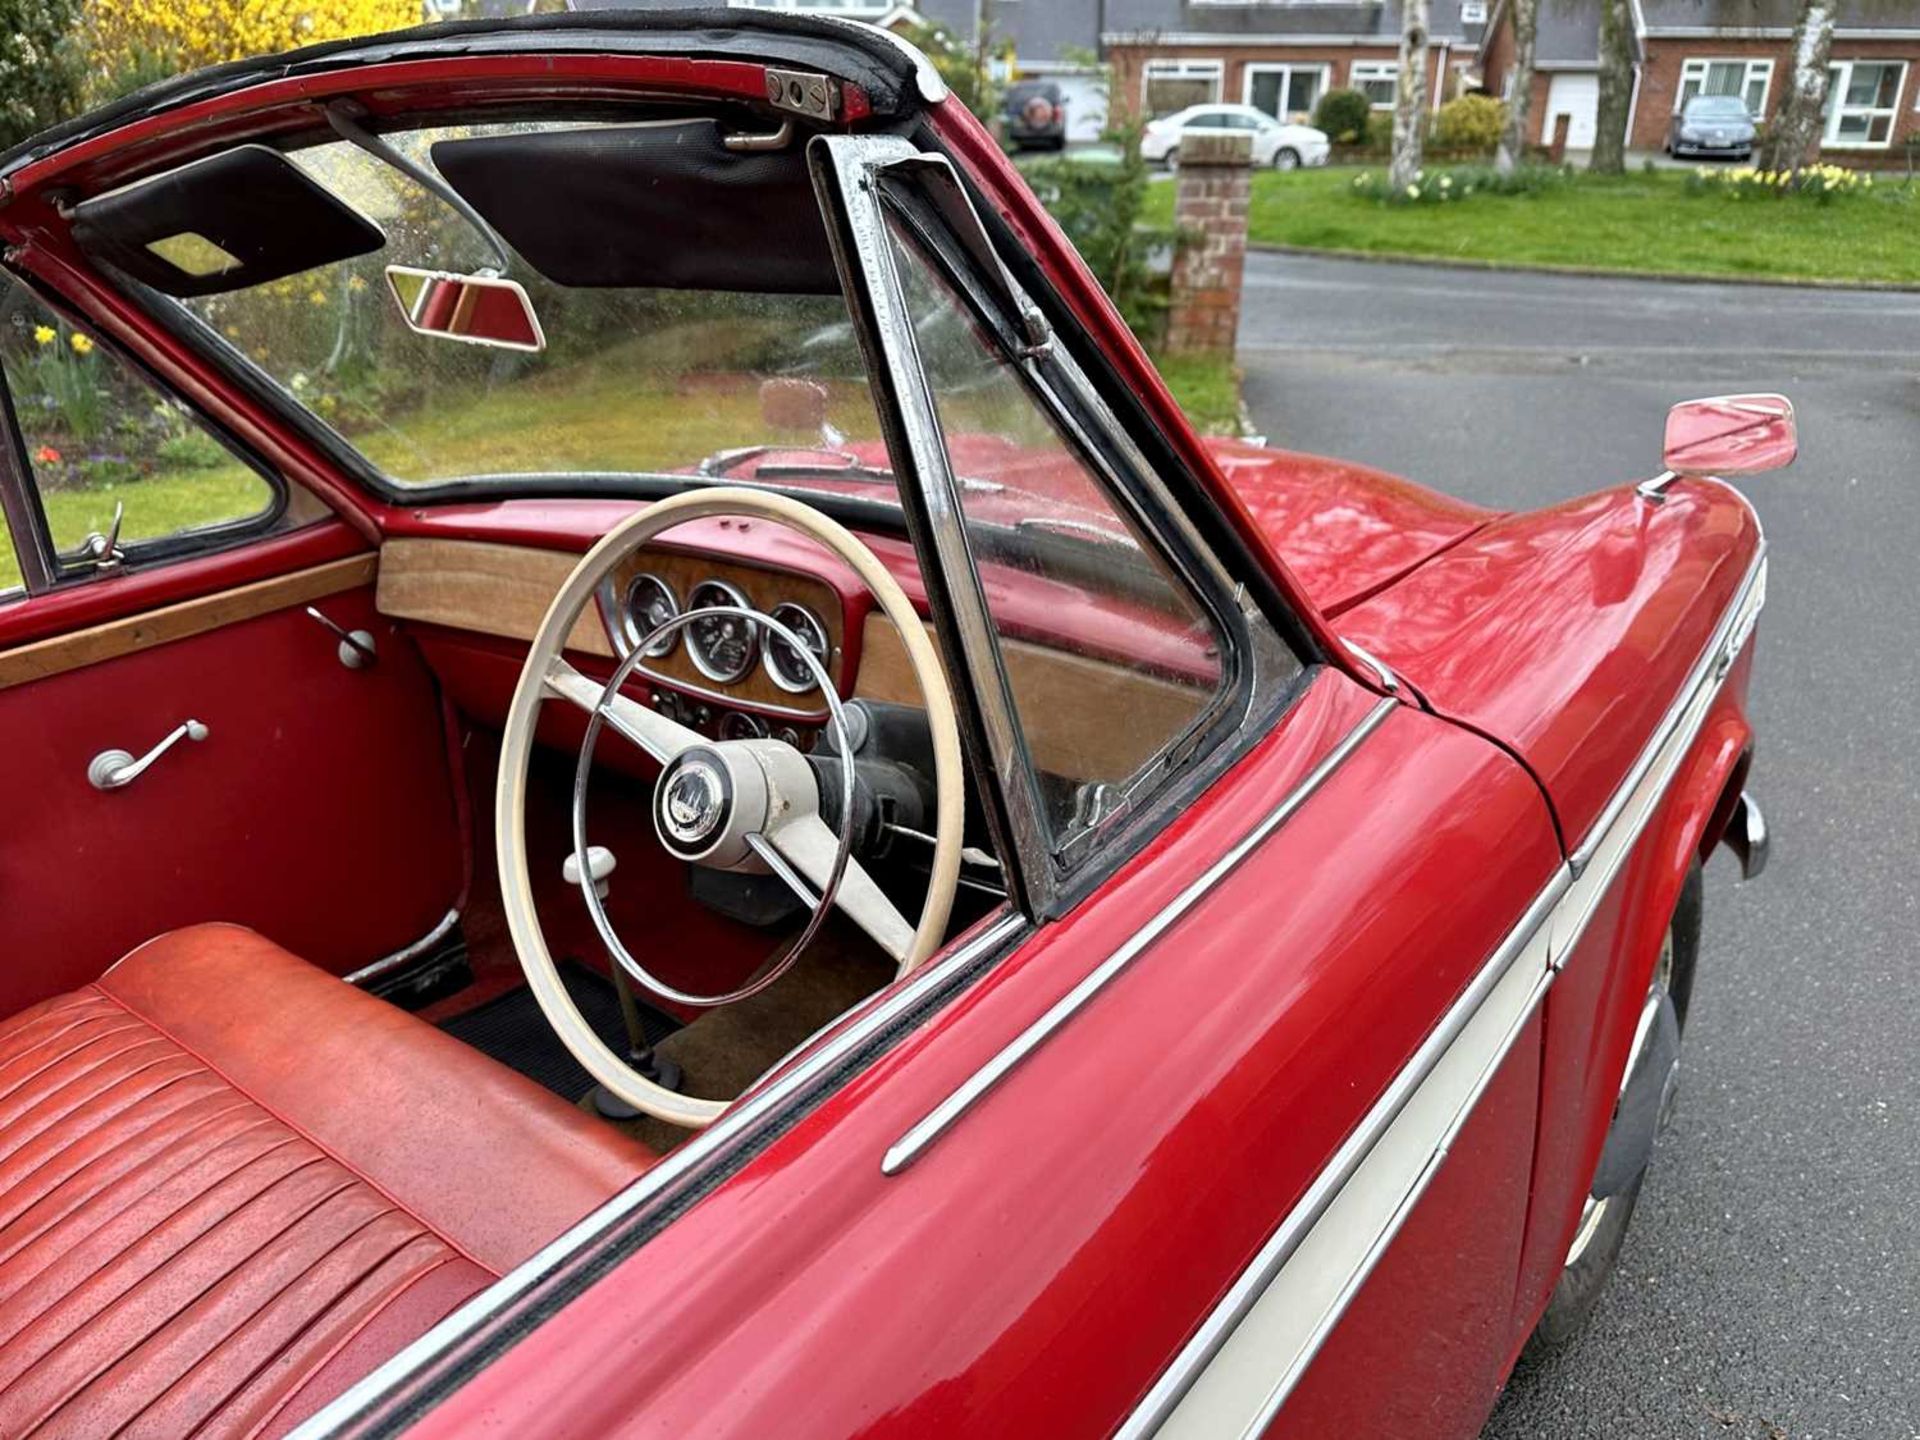 1961 Singer Gazelle Convertible Comes complete with overdrive, period radio and badge bar - Image 39 of 95